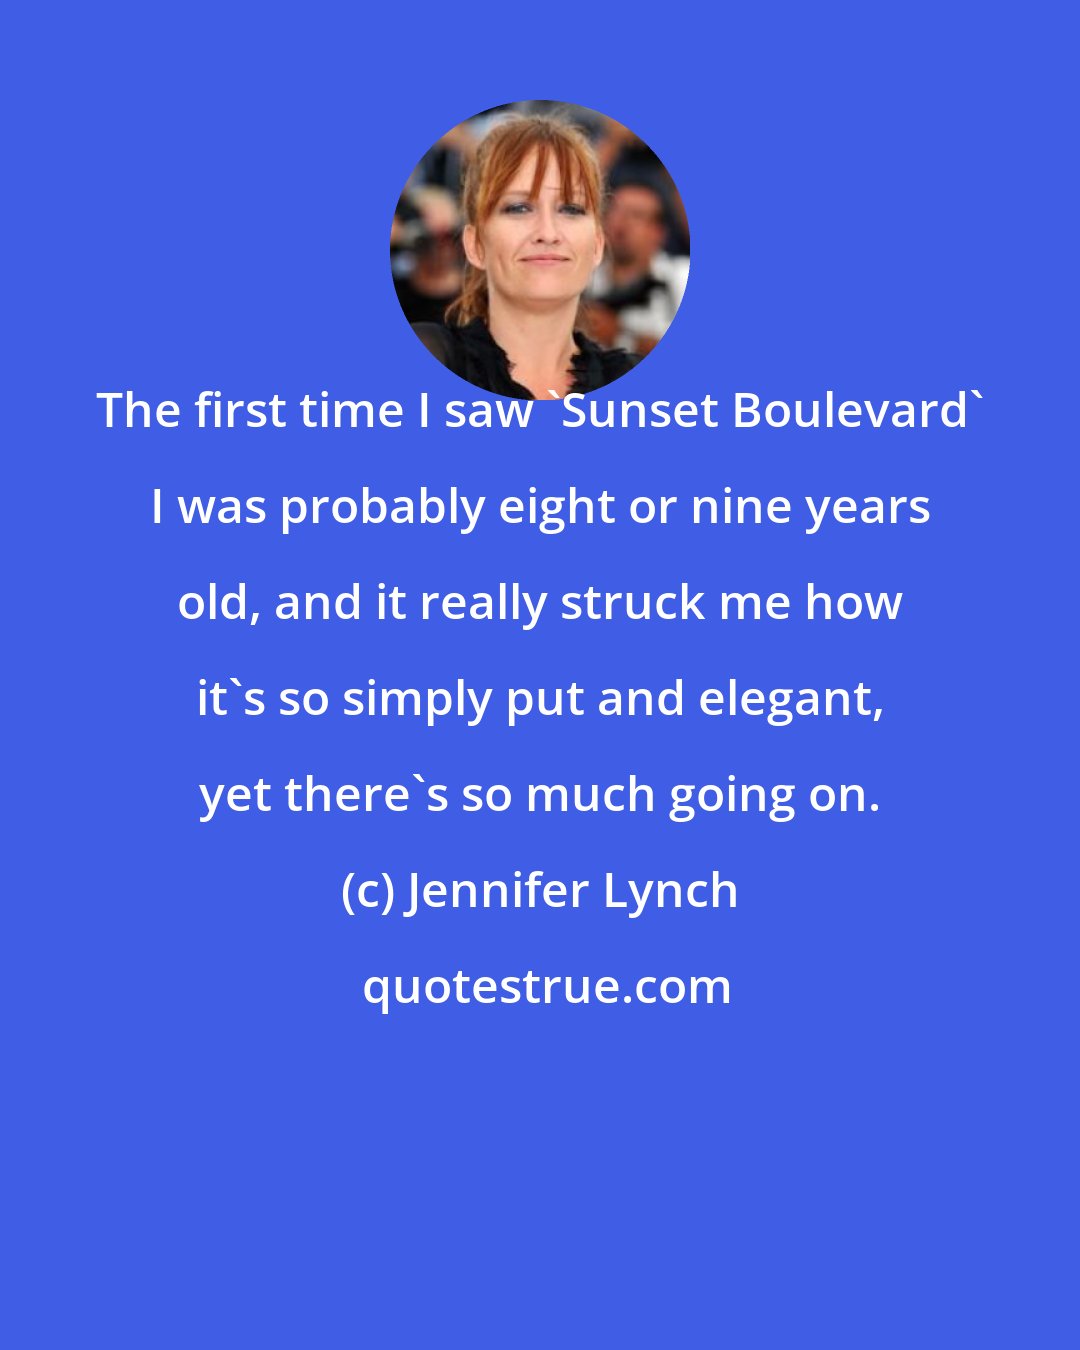 Jennifer Lynch: The first time I saw 'Sunset Boulevard' I was probably eight or nine years old, and it really struck me how it's so simply put and elegant, yet there's so much going on.